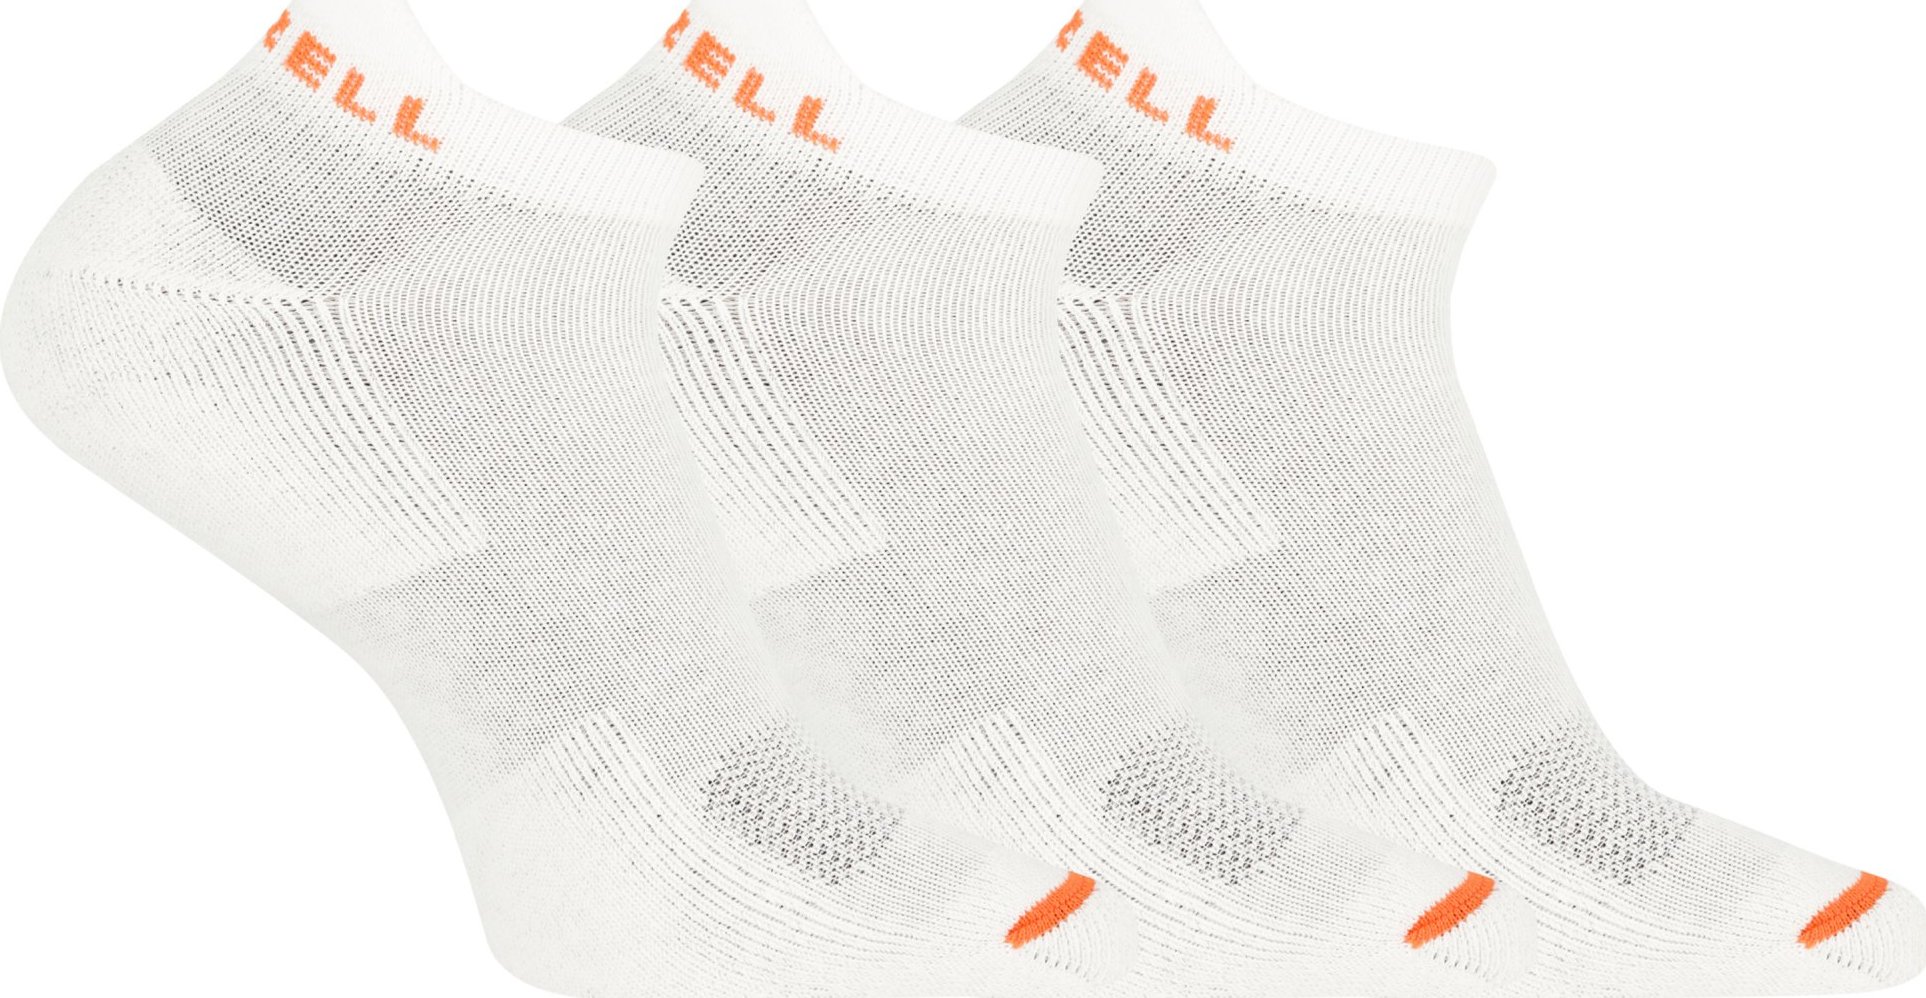 Ponožky MERRELL Cushioned Cotton Low Cut Tab (3 pack) Velikost: S/M